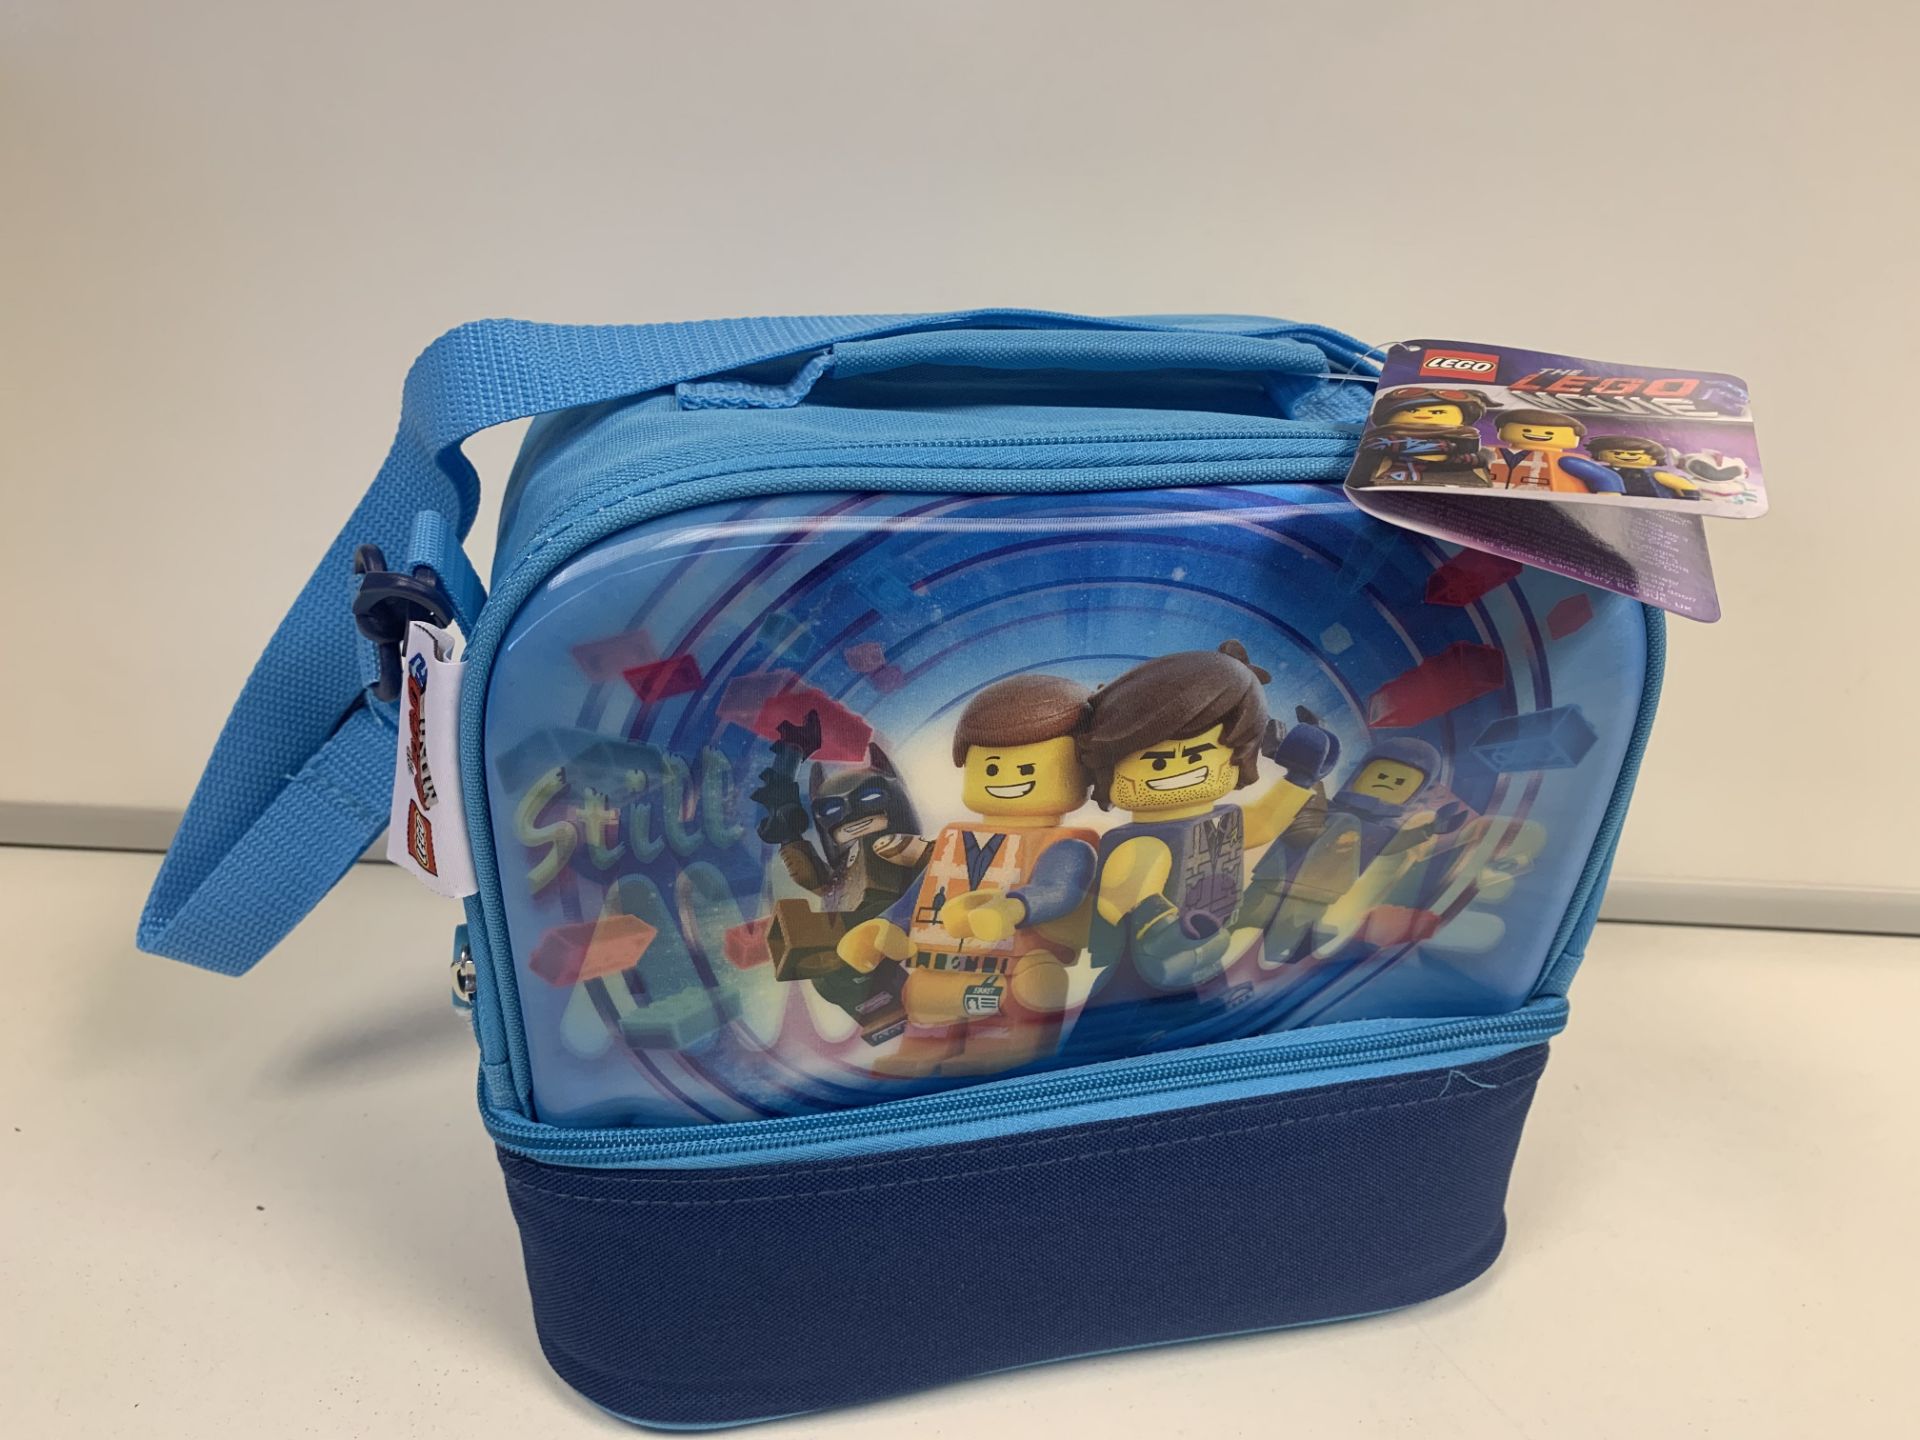 24 X BRAND NEW BOXED LEGO MOVIE 2 COMPARTABLE LENTICULAR LUNCH BOXES IN 2 BOXES